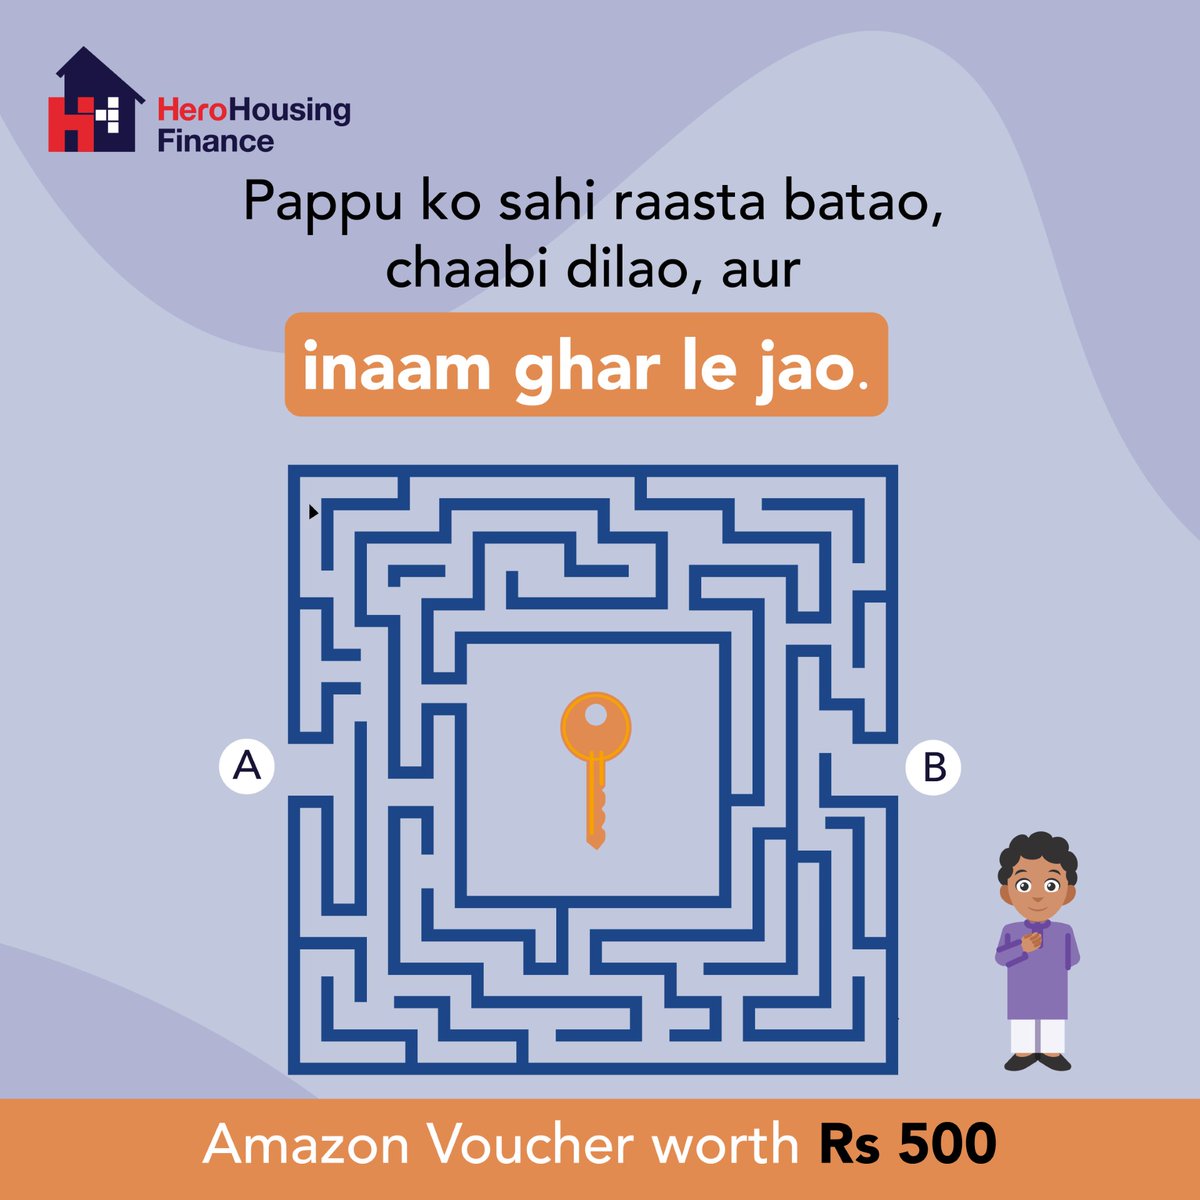 Solve the maze, get the key, and win rewards. Help Pappu find the way and take home Amazon Voucher worth Rs. 500. #ContestAlert #HomeLoan #HeroHousingFinance